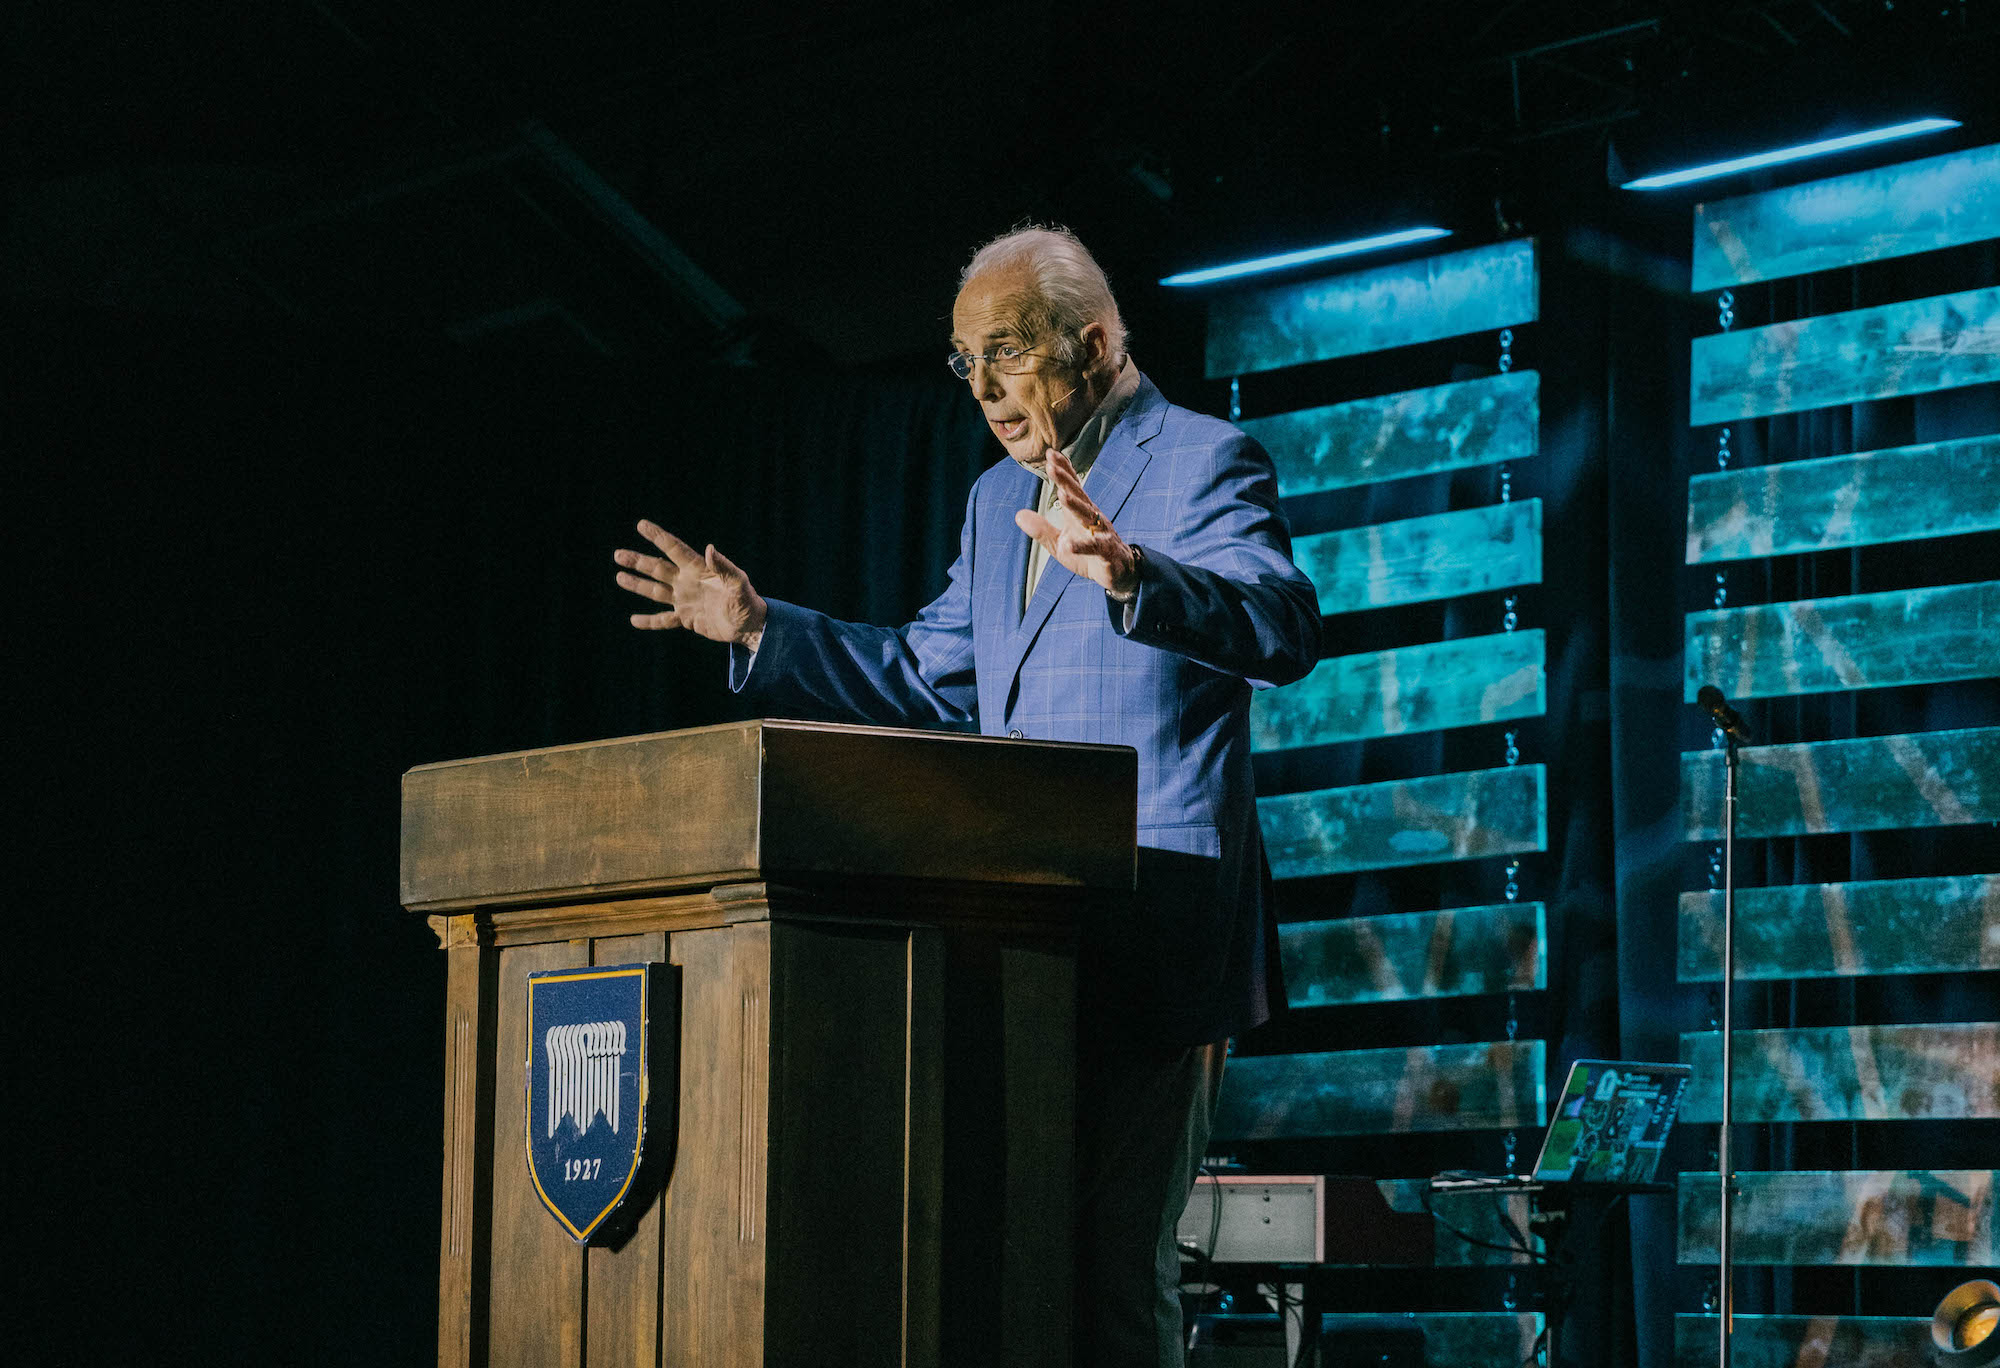 Chancellor Conducts Two-Part Chapel Series